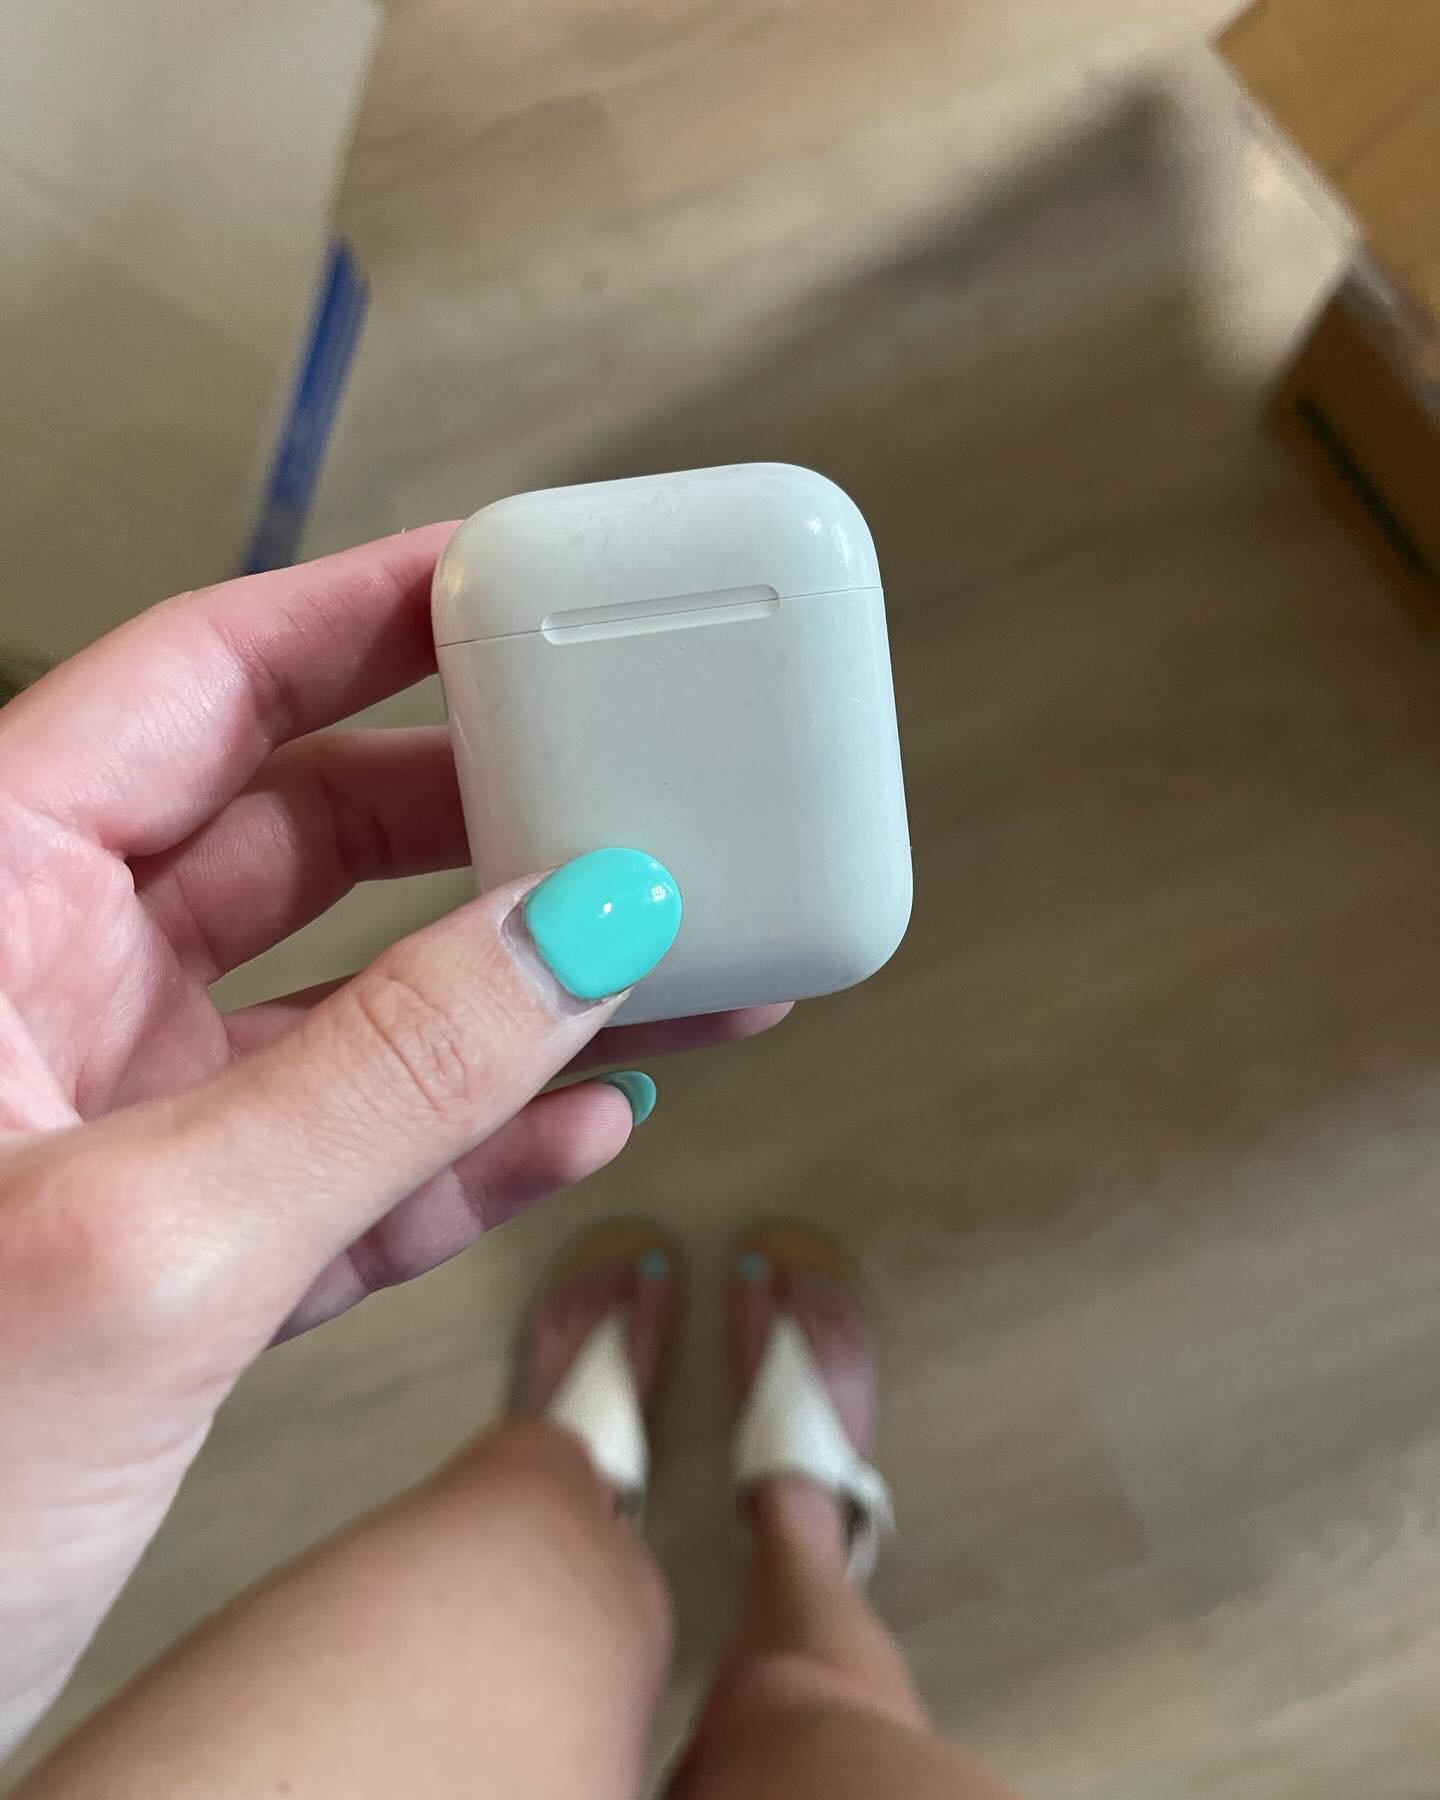 I found my AirPods! I’m so glad.  So many boxes to go through, but I’m finding the things I need.